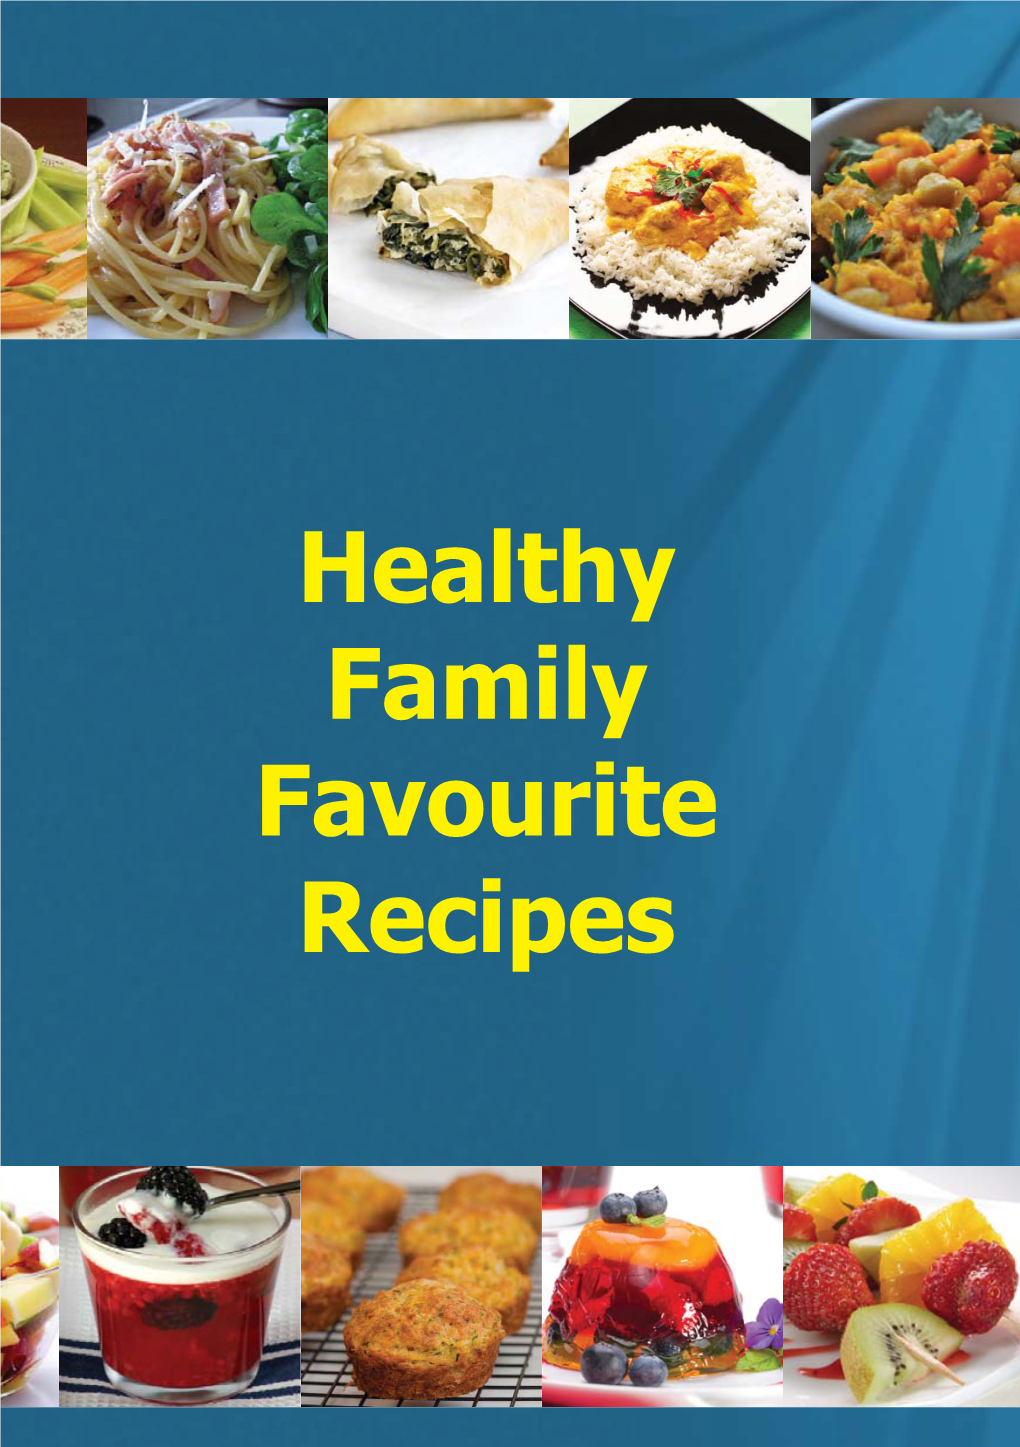 Healthy Family Favourite Recipes This Recipe Book Has Been Produced By